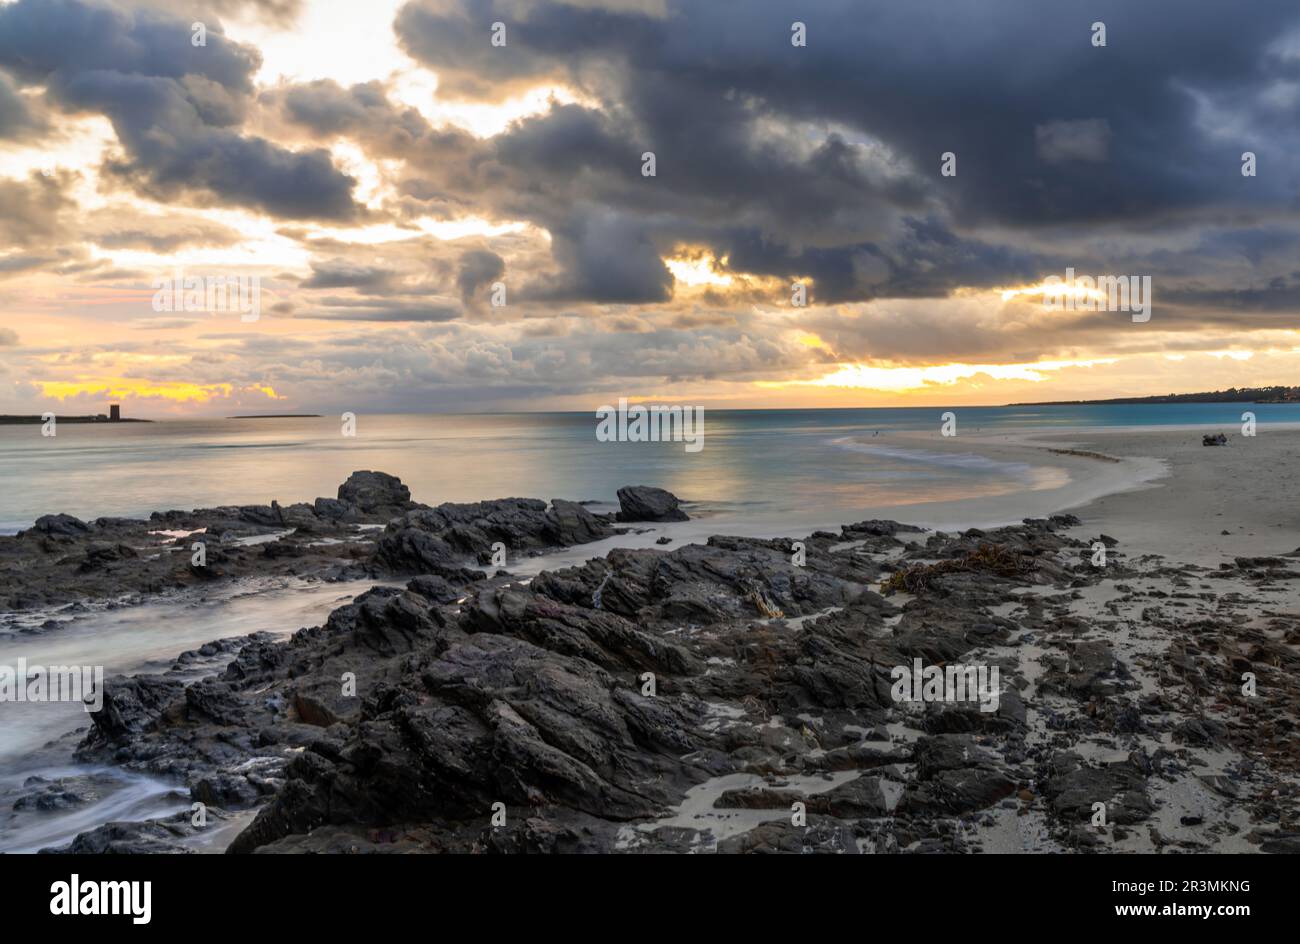 View of La Pelosa beach in Sardinia at sunrise with rocky reef in the foreground Stock Photo